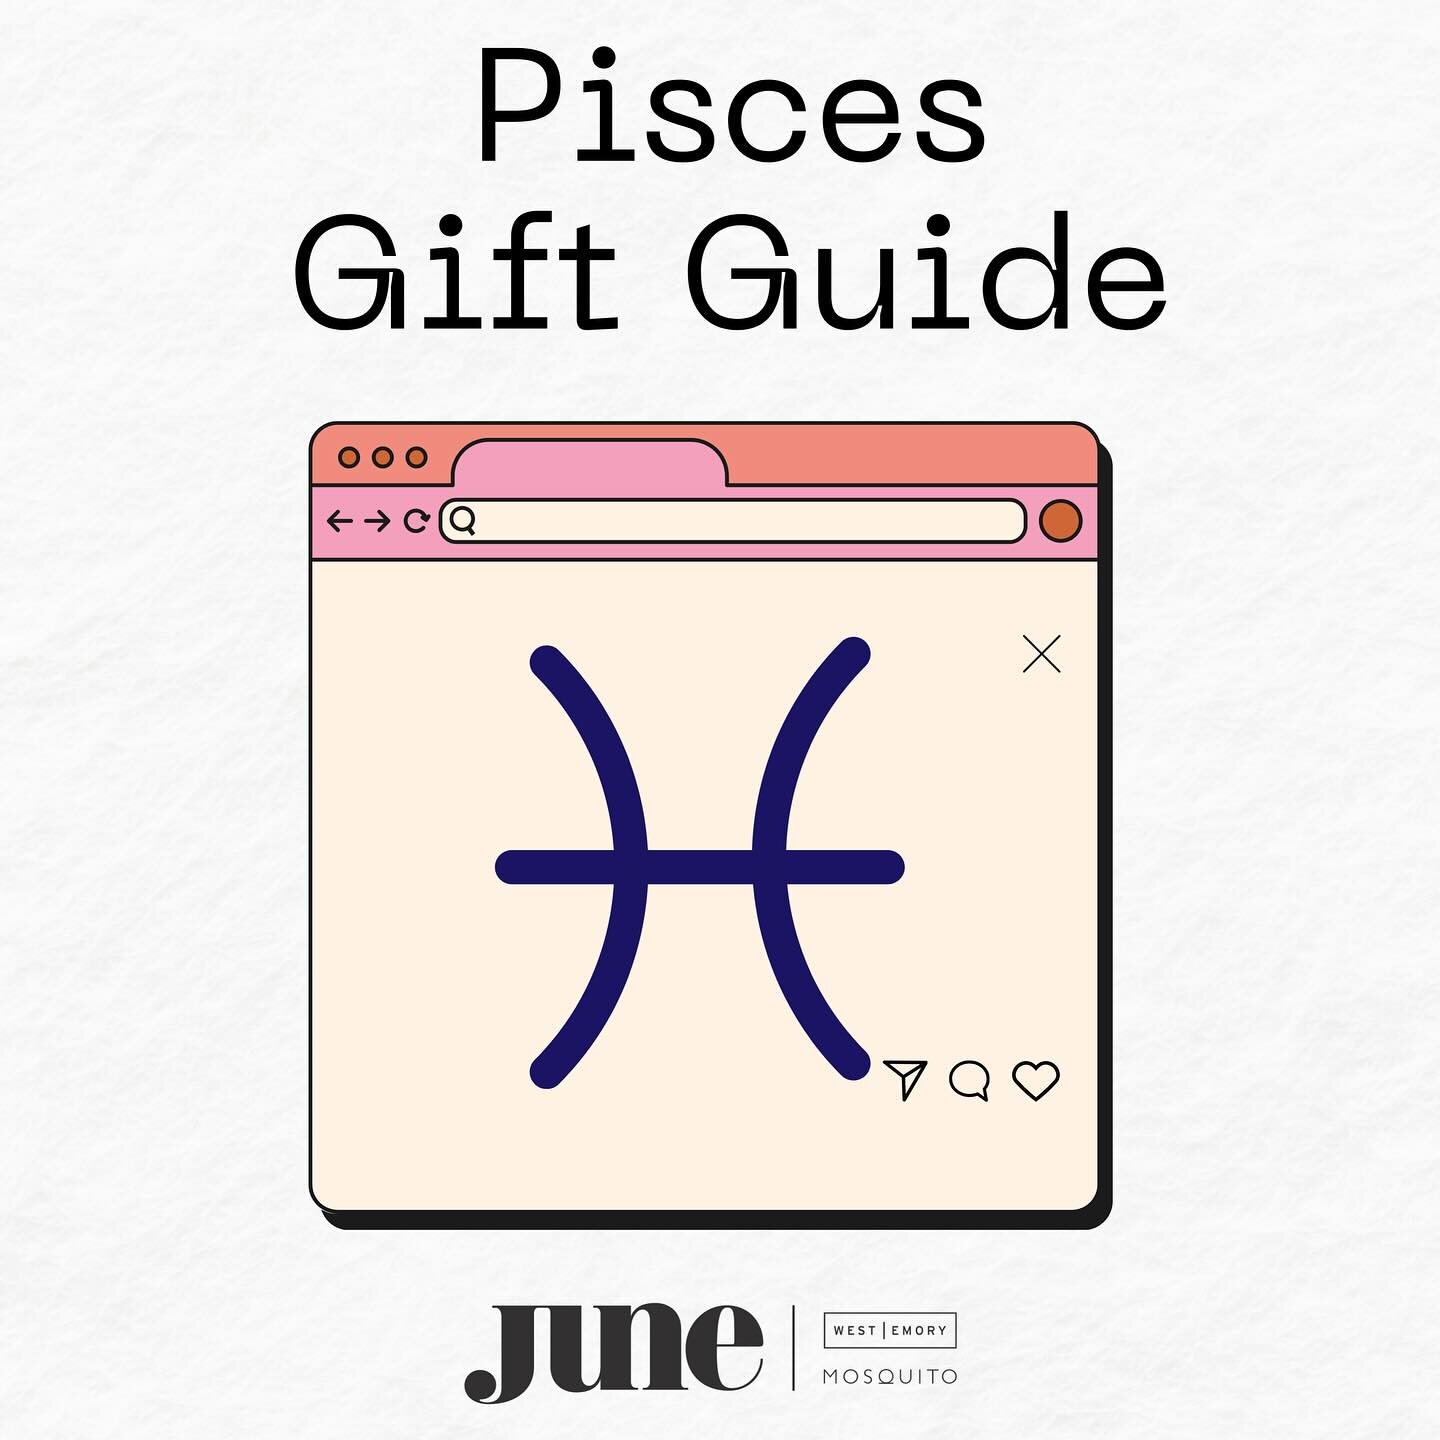 Pisces season is here! Swipe to learn more about Pisces and some gifts they&rsquo;ll love ♓️